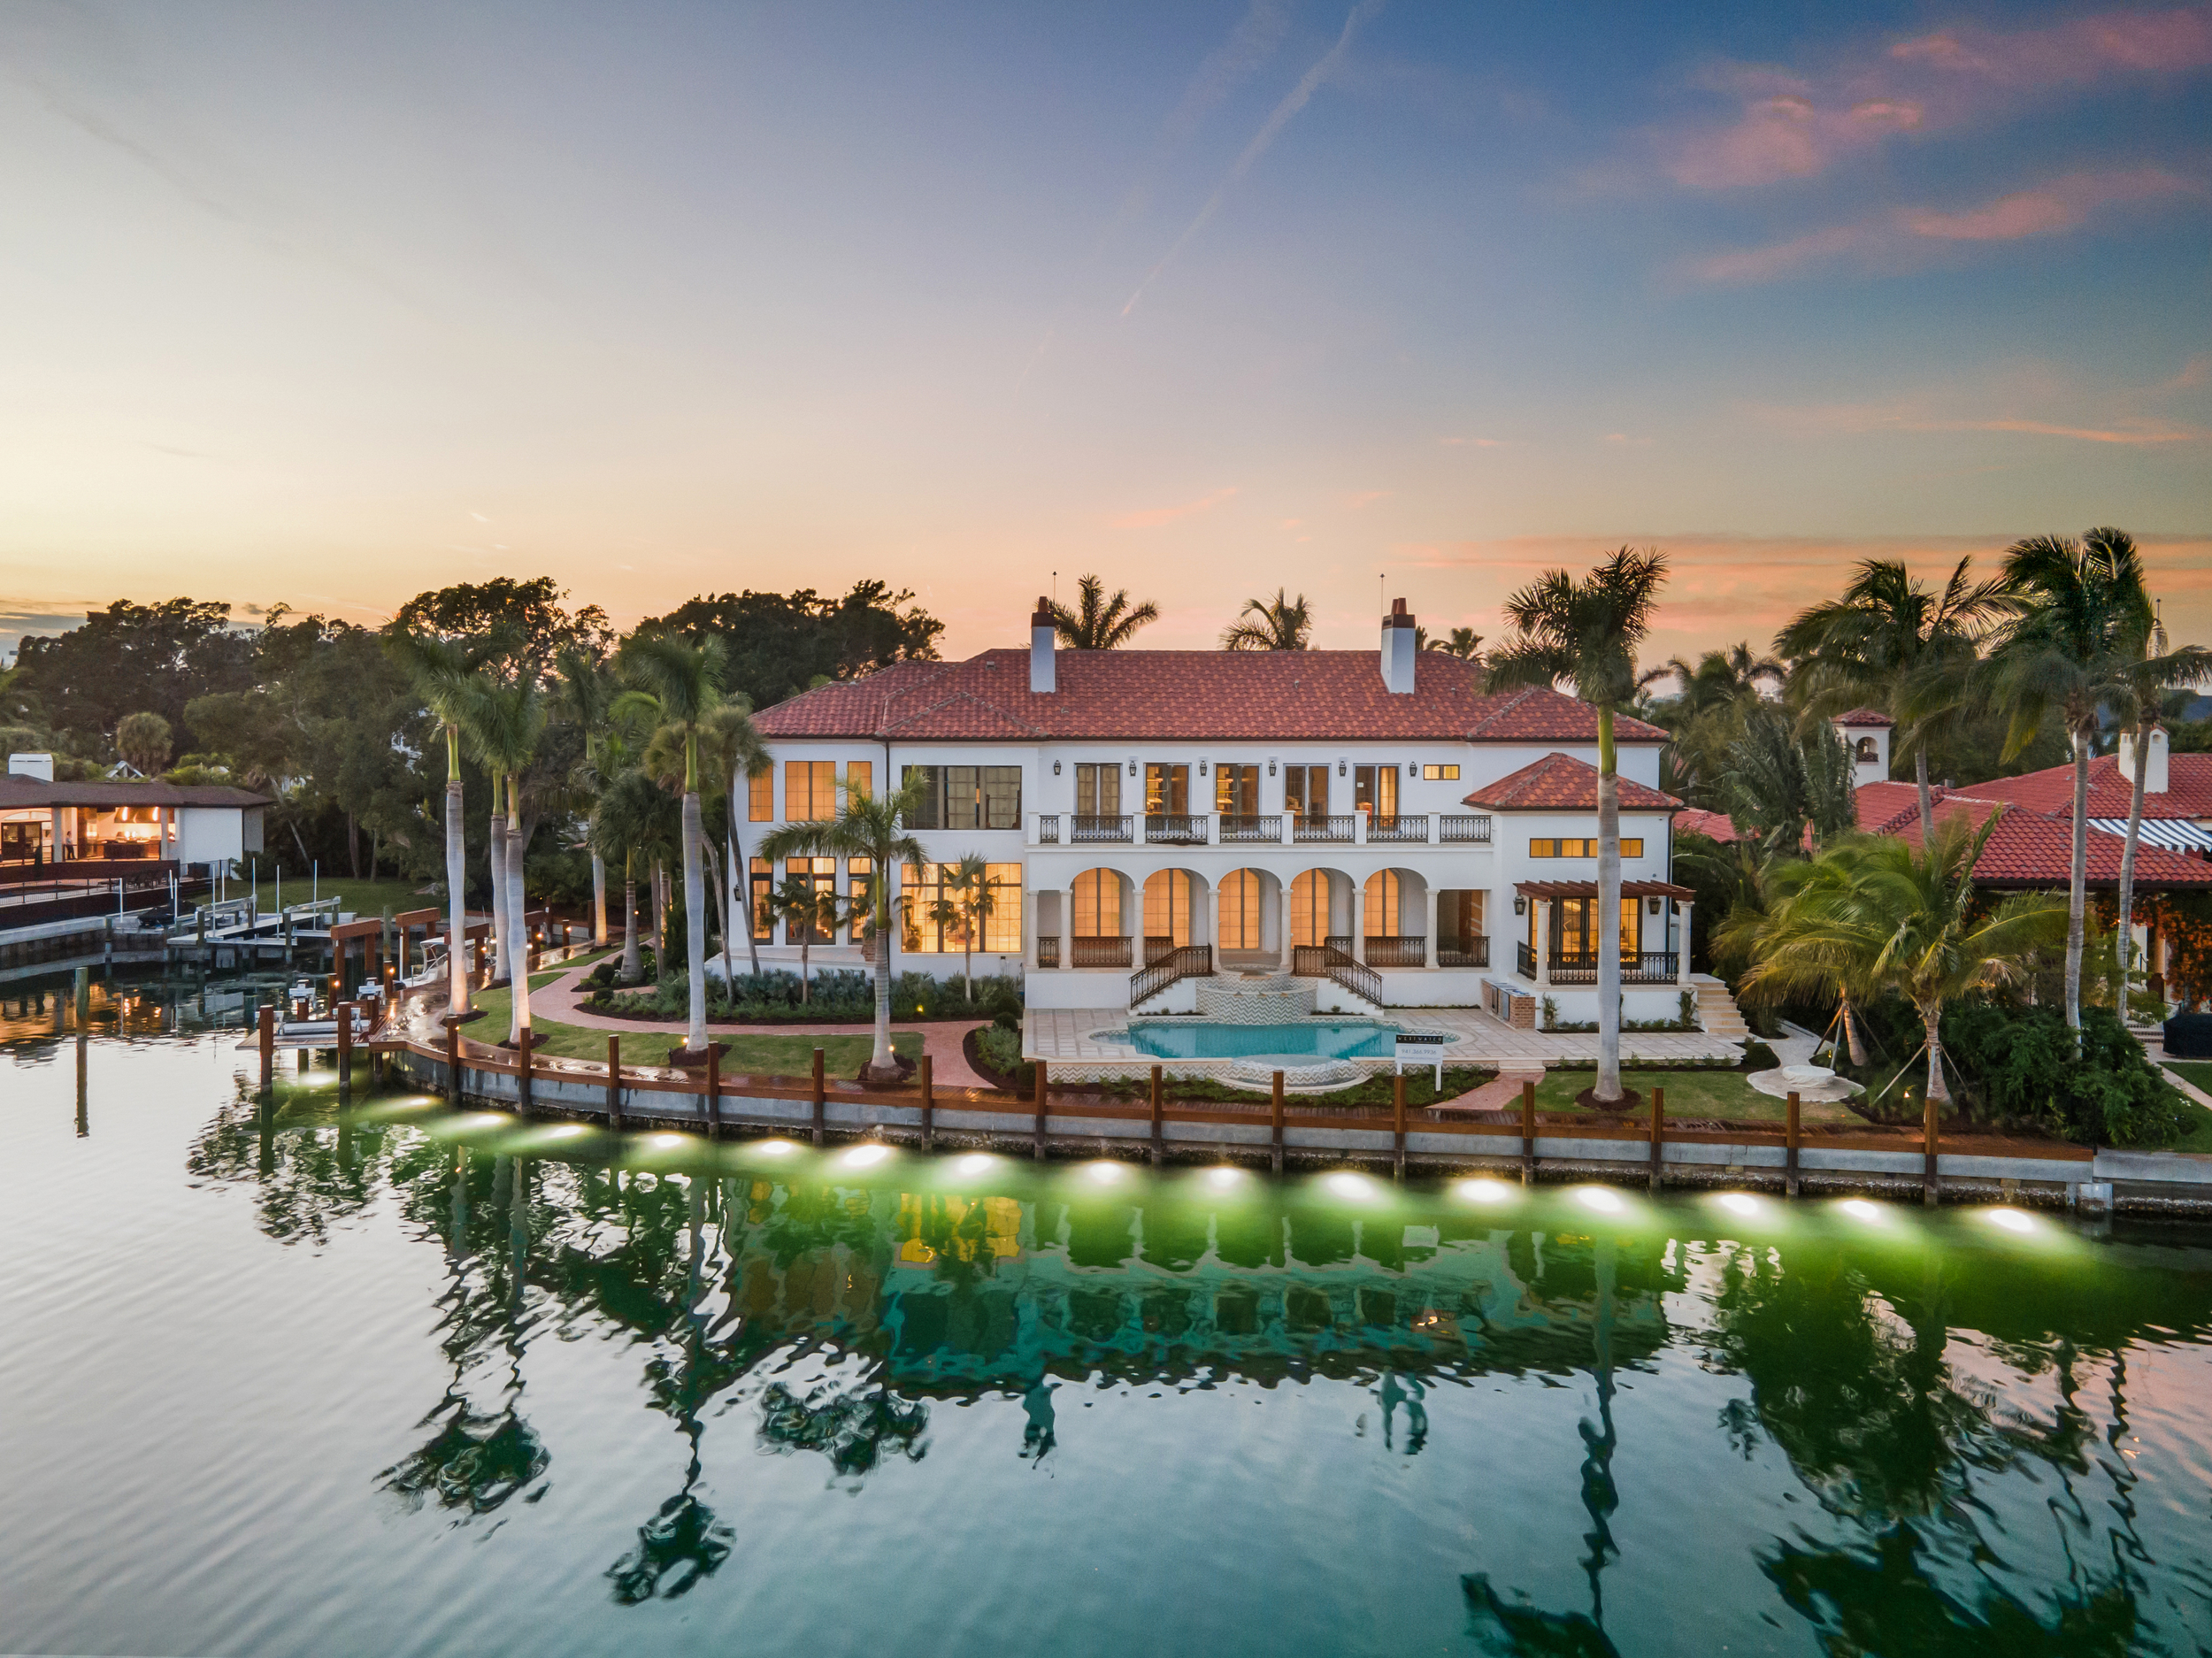 Luxury home with a custom boat dock and lift, landscaping, and pool in Sarasota, Florida.